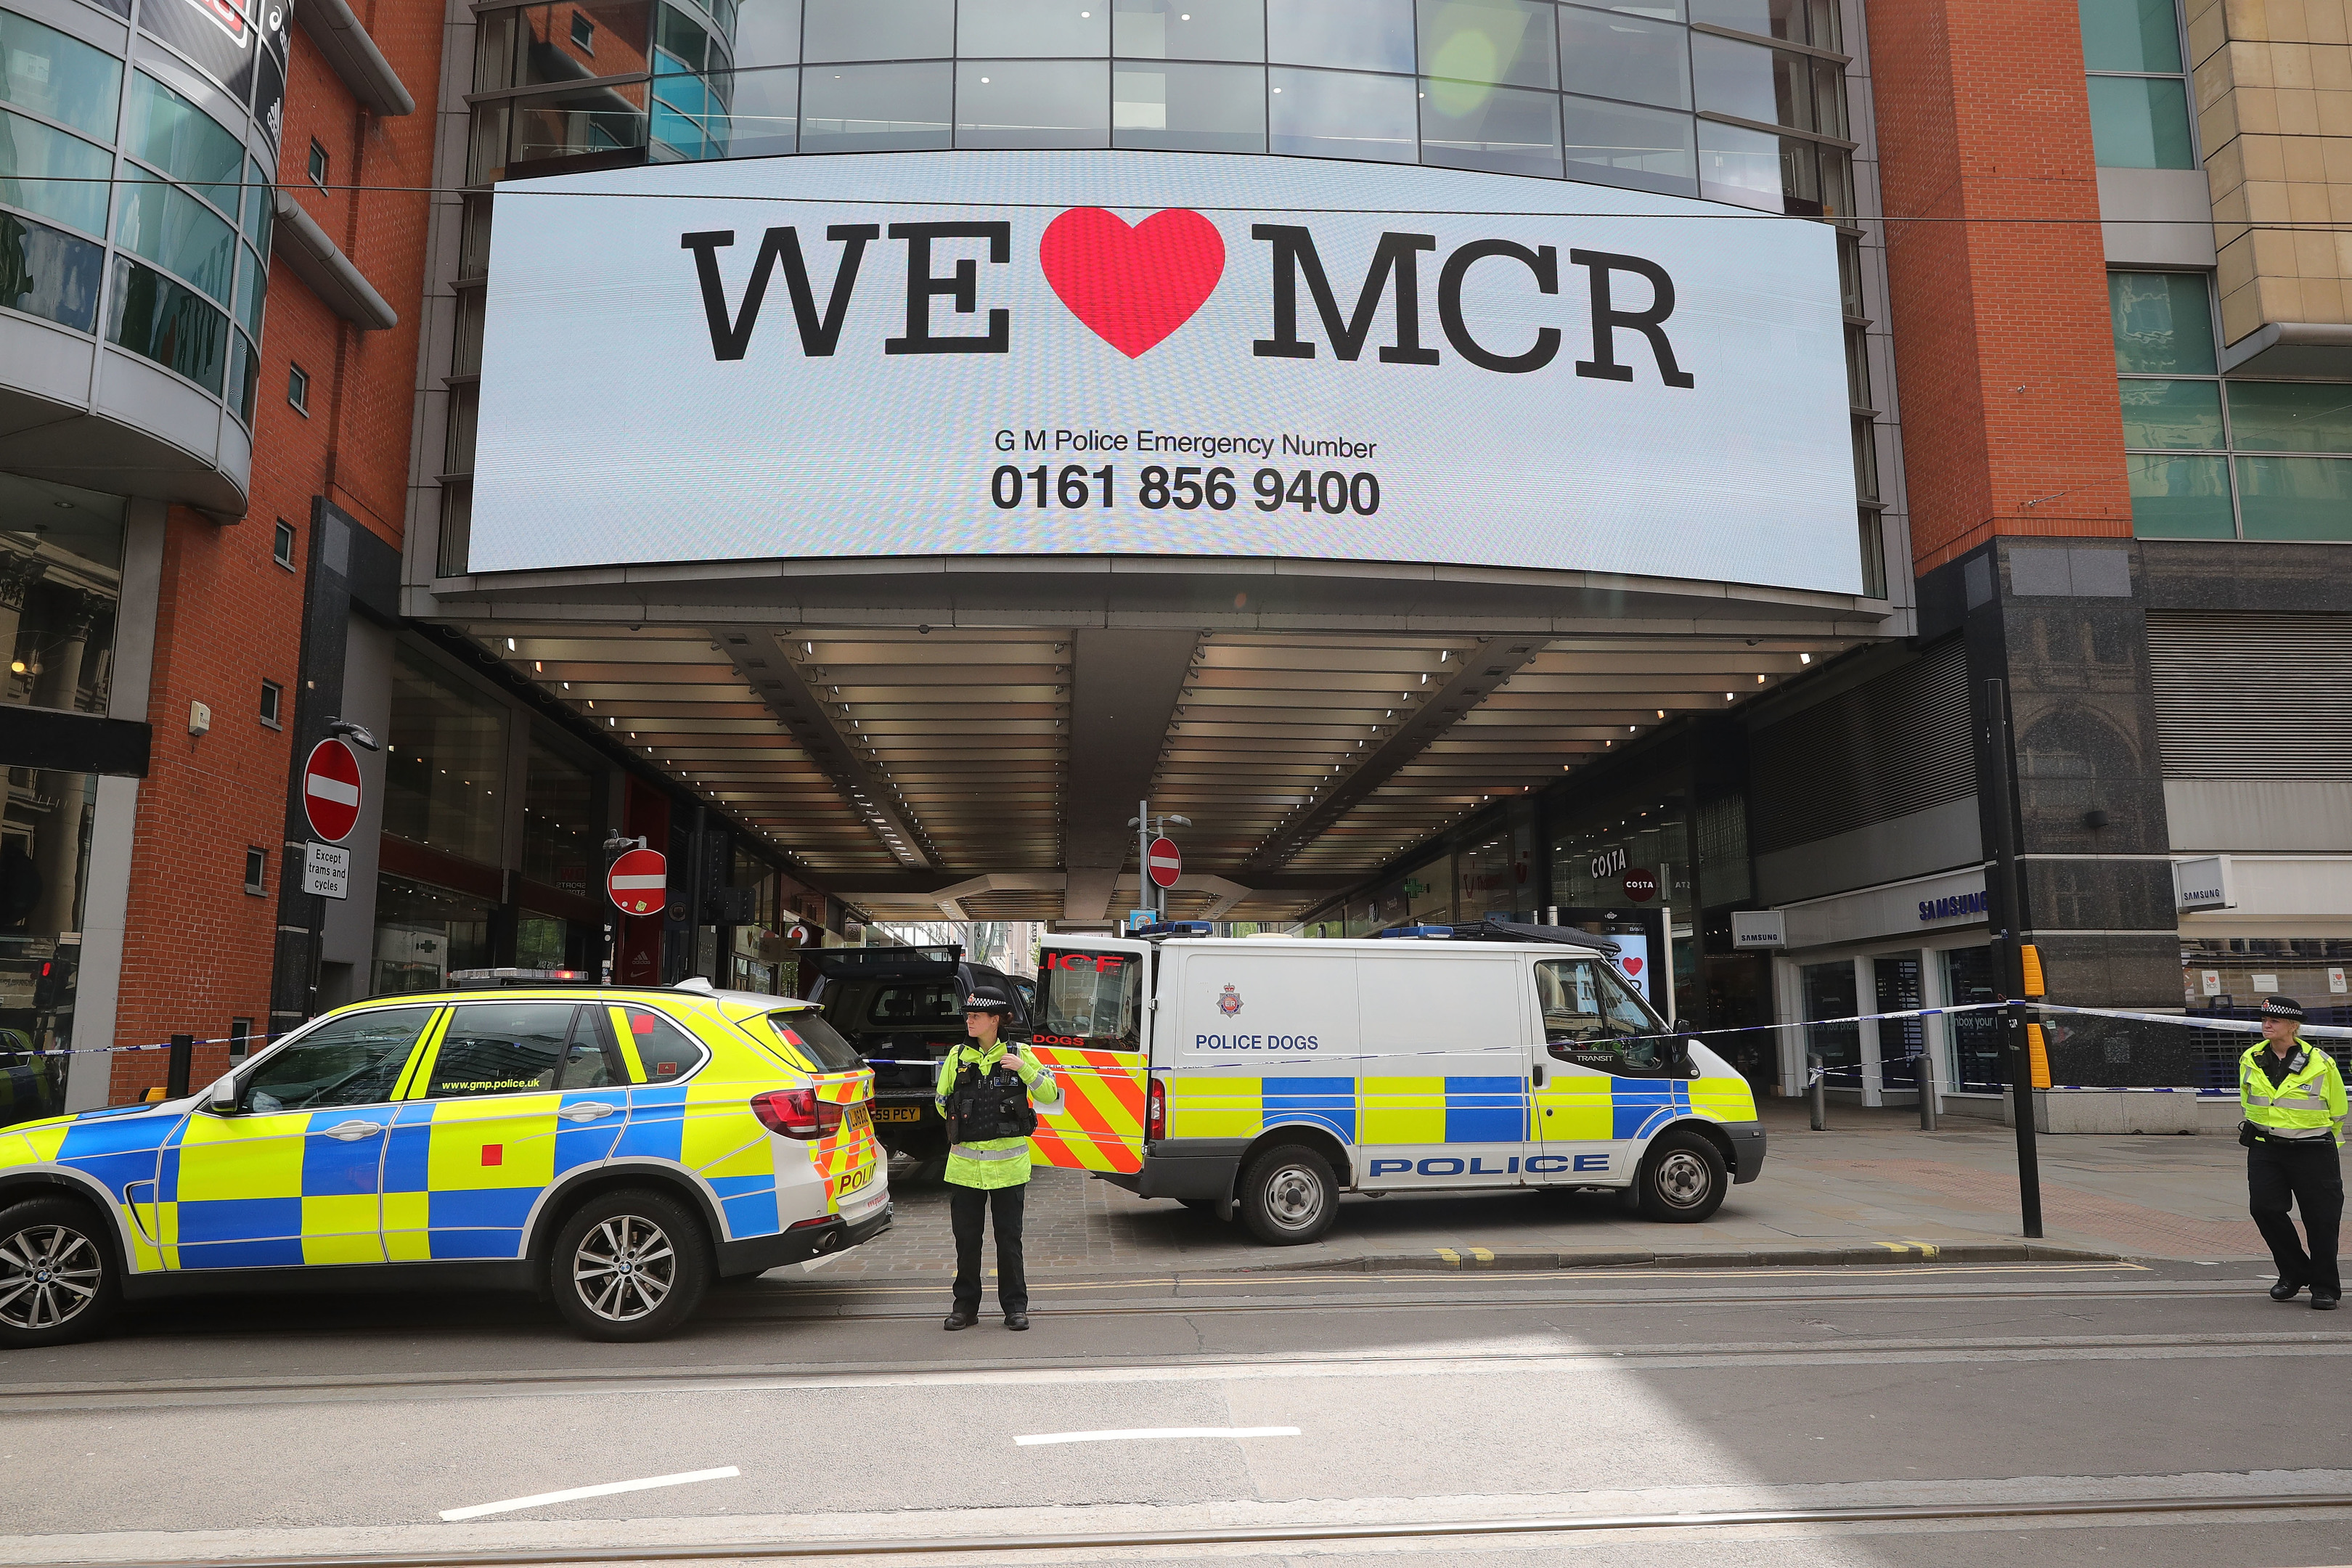 An explosion occurred at Manchester Arena as concert goers were leaving the venue after Ariana Grande had performed. Greater Manchester Police are treating the explosion as a terrorist attack and have confirmed 22 fatalities and 59 injured. (Christopher Furlong/Getty Images)